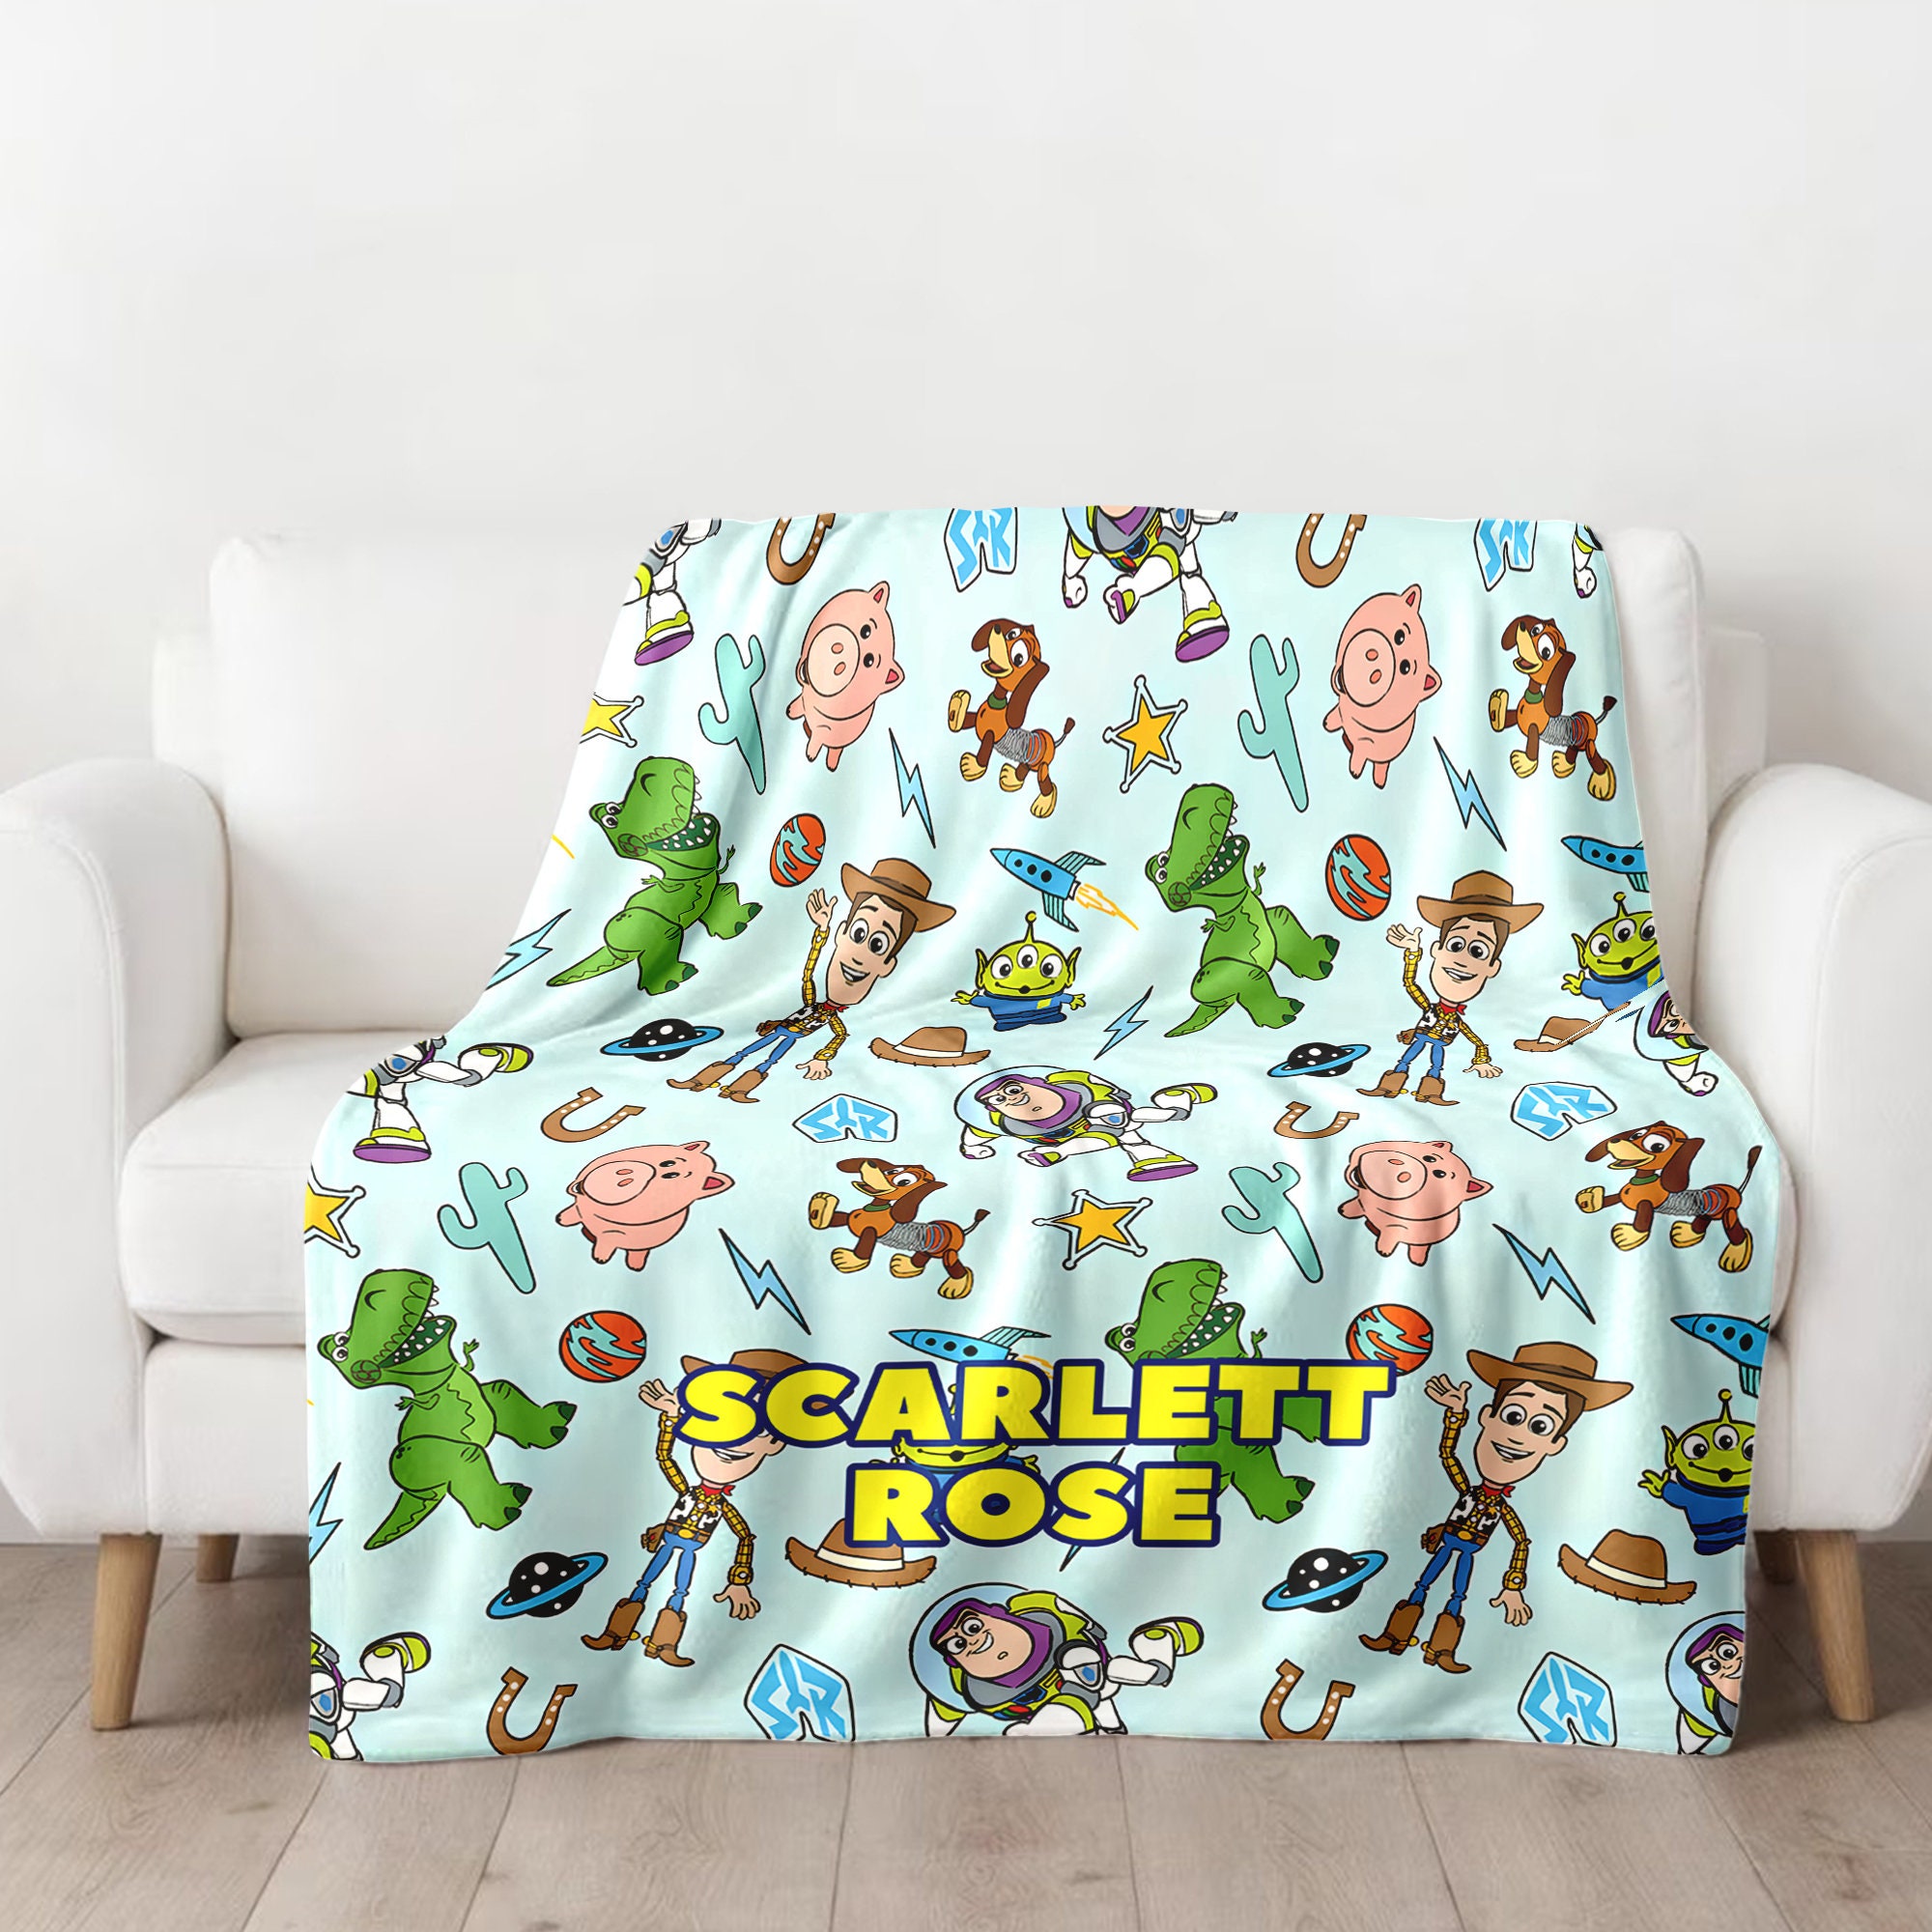 Personalized Toy Movie Blanket, Characters Blanket, Toy Movie Blanket Christmas Gift